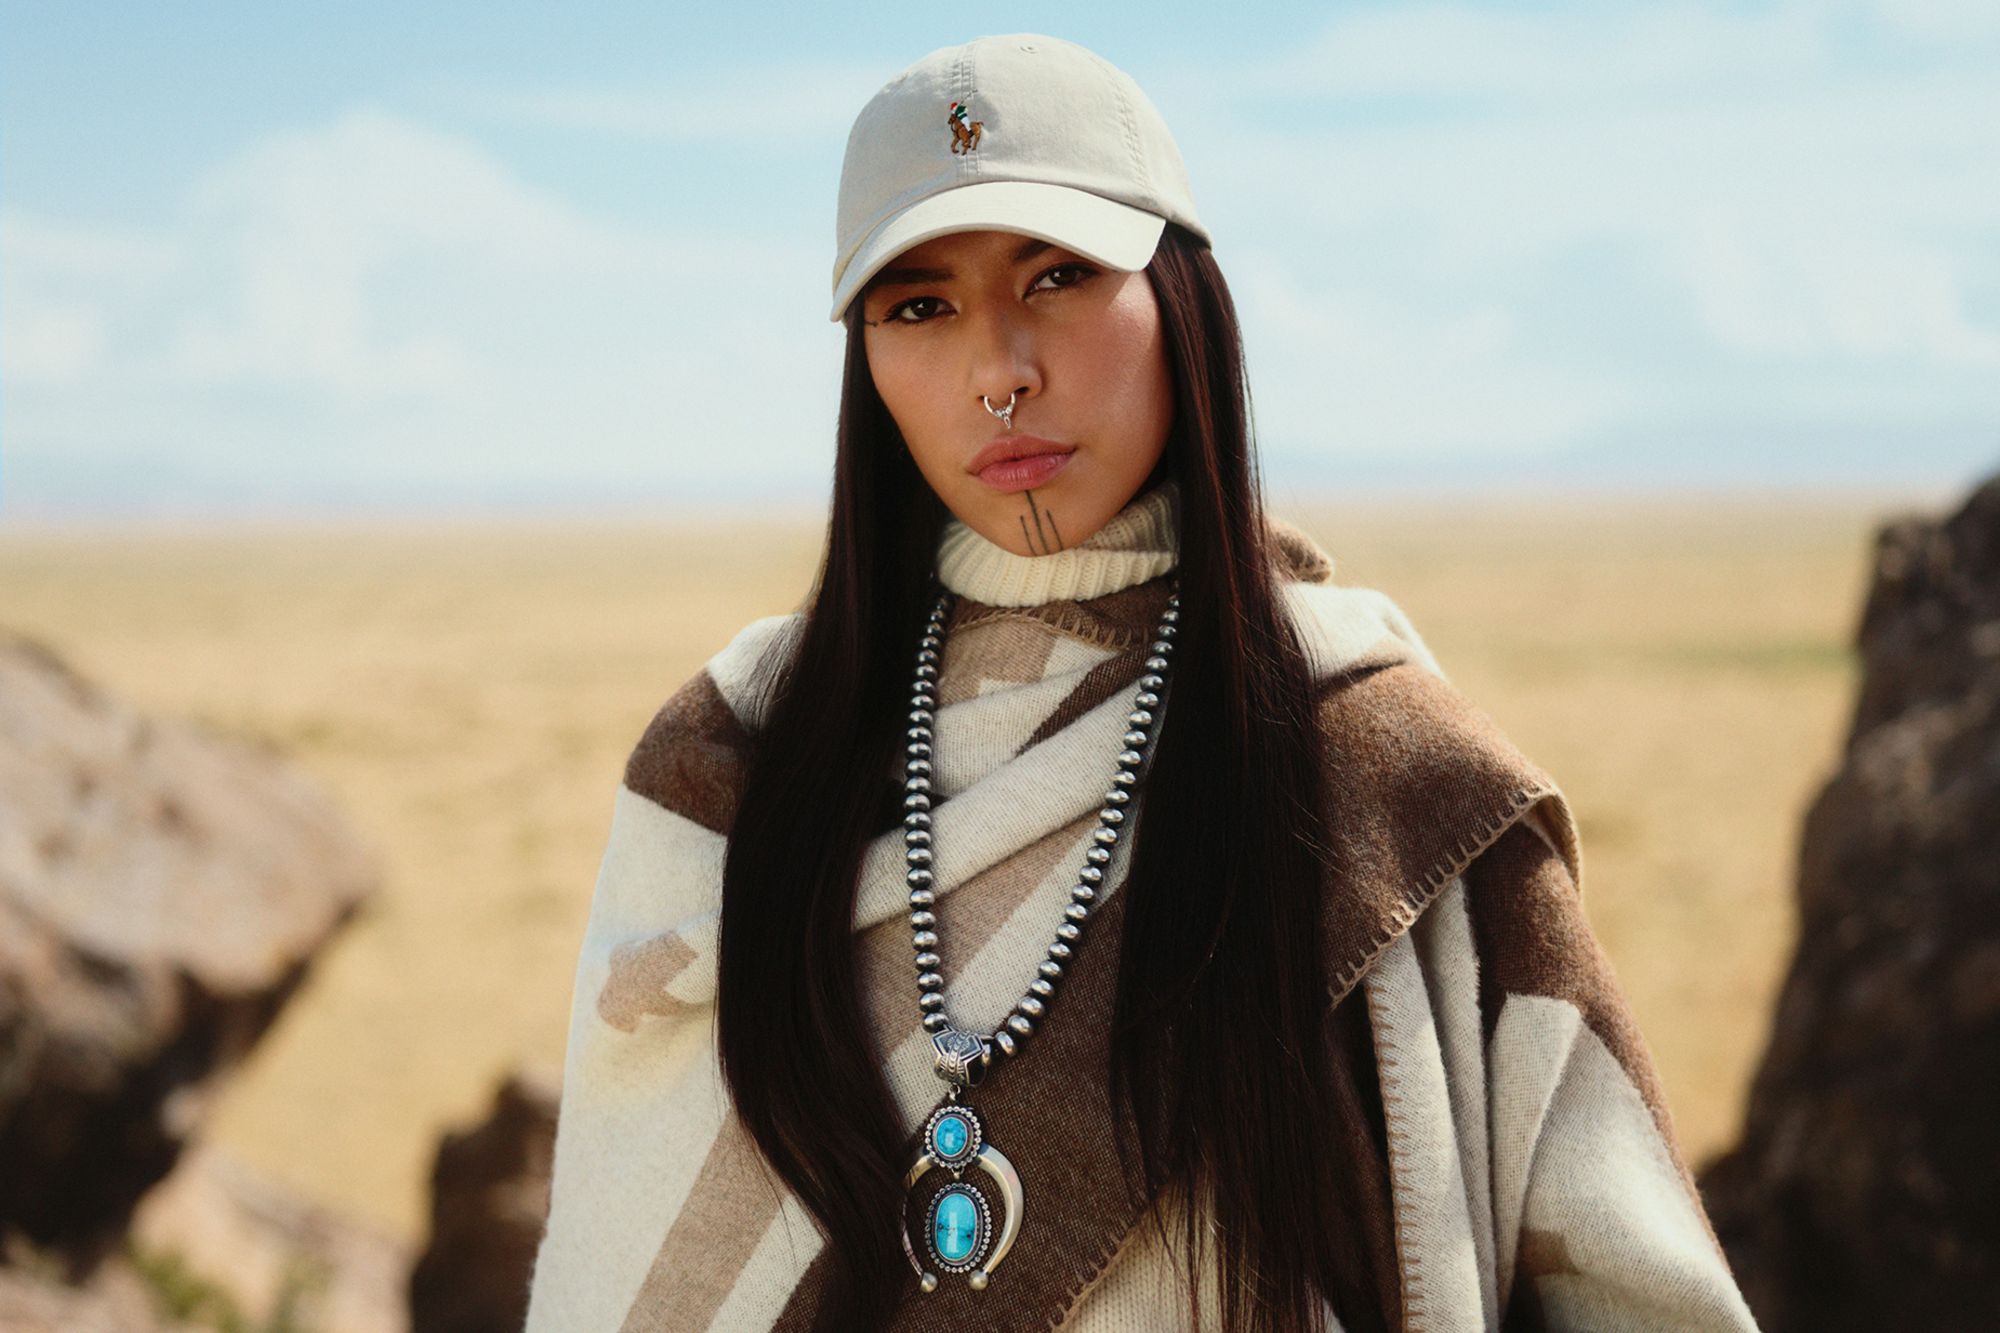 Ralph Lauren debuts its "Artists in Residence" program with a capsule collection designed by the Native American textile artist Naiomi Glasses.